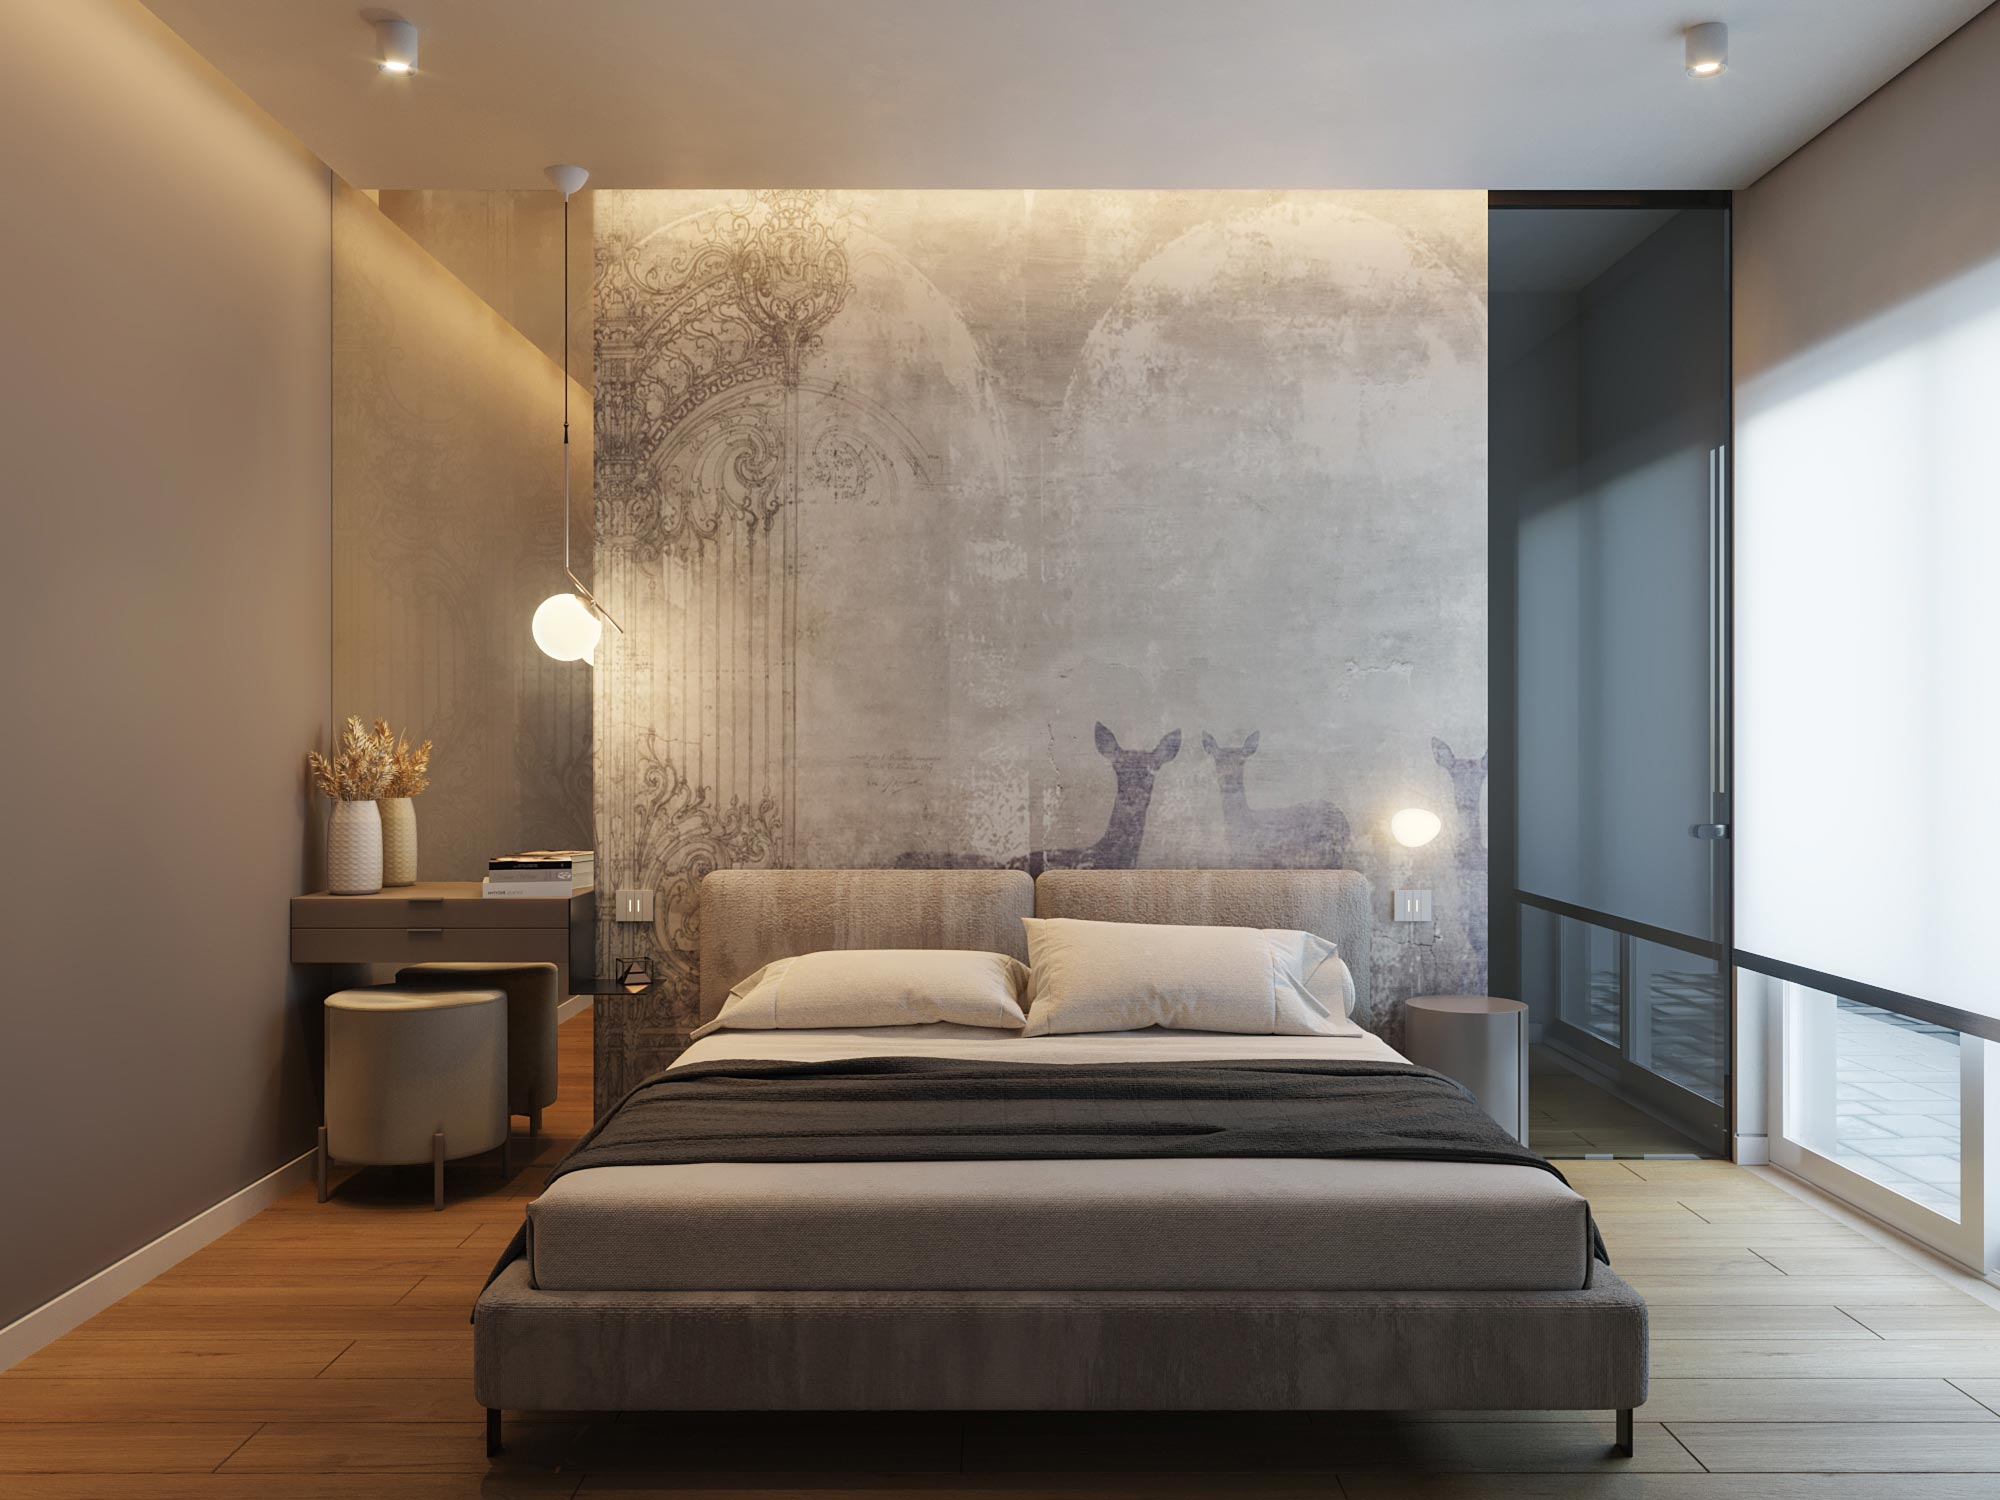 Master Bedroom – Private project by Andrea Palomba